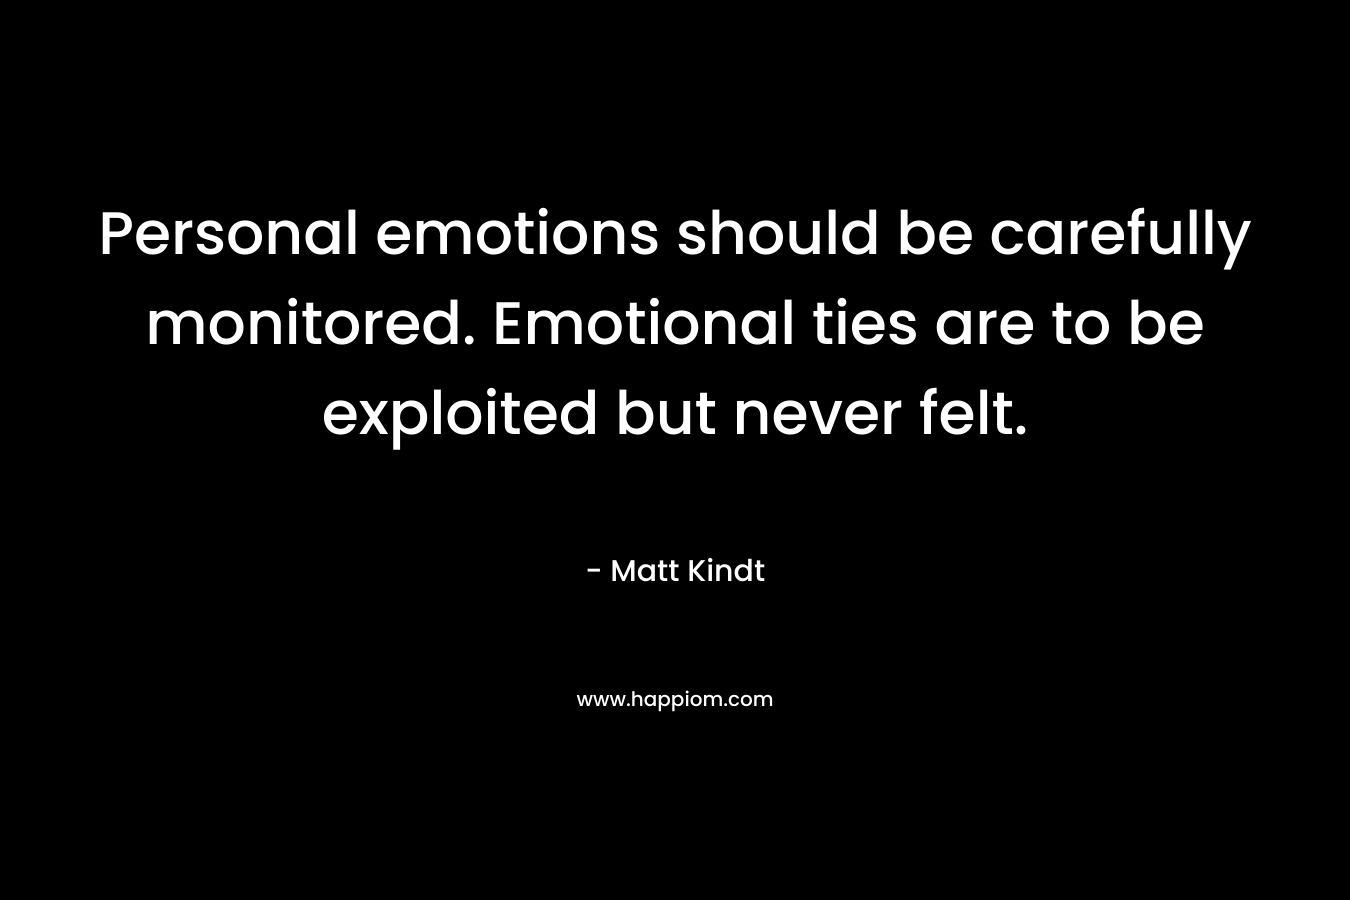 Personal emotions should be carefully monitored. Emotional ties are to be exploited but never felt. – Matt Kindt